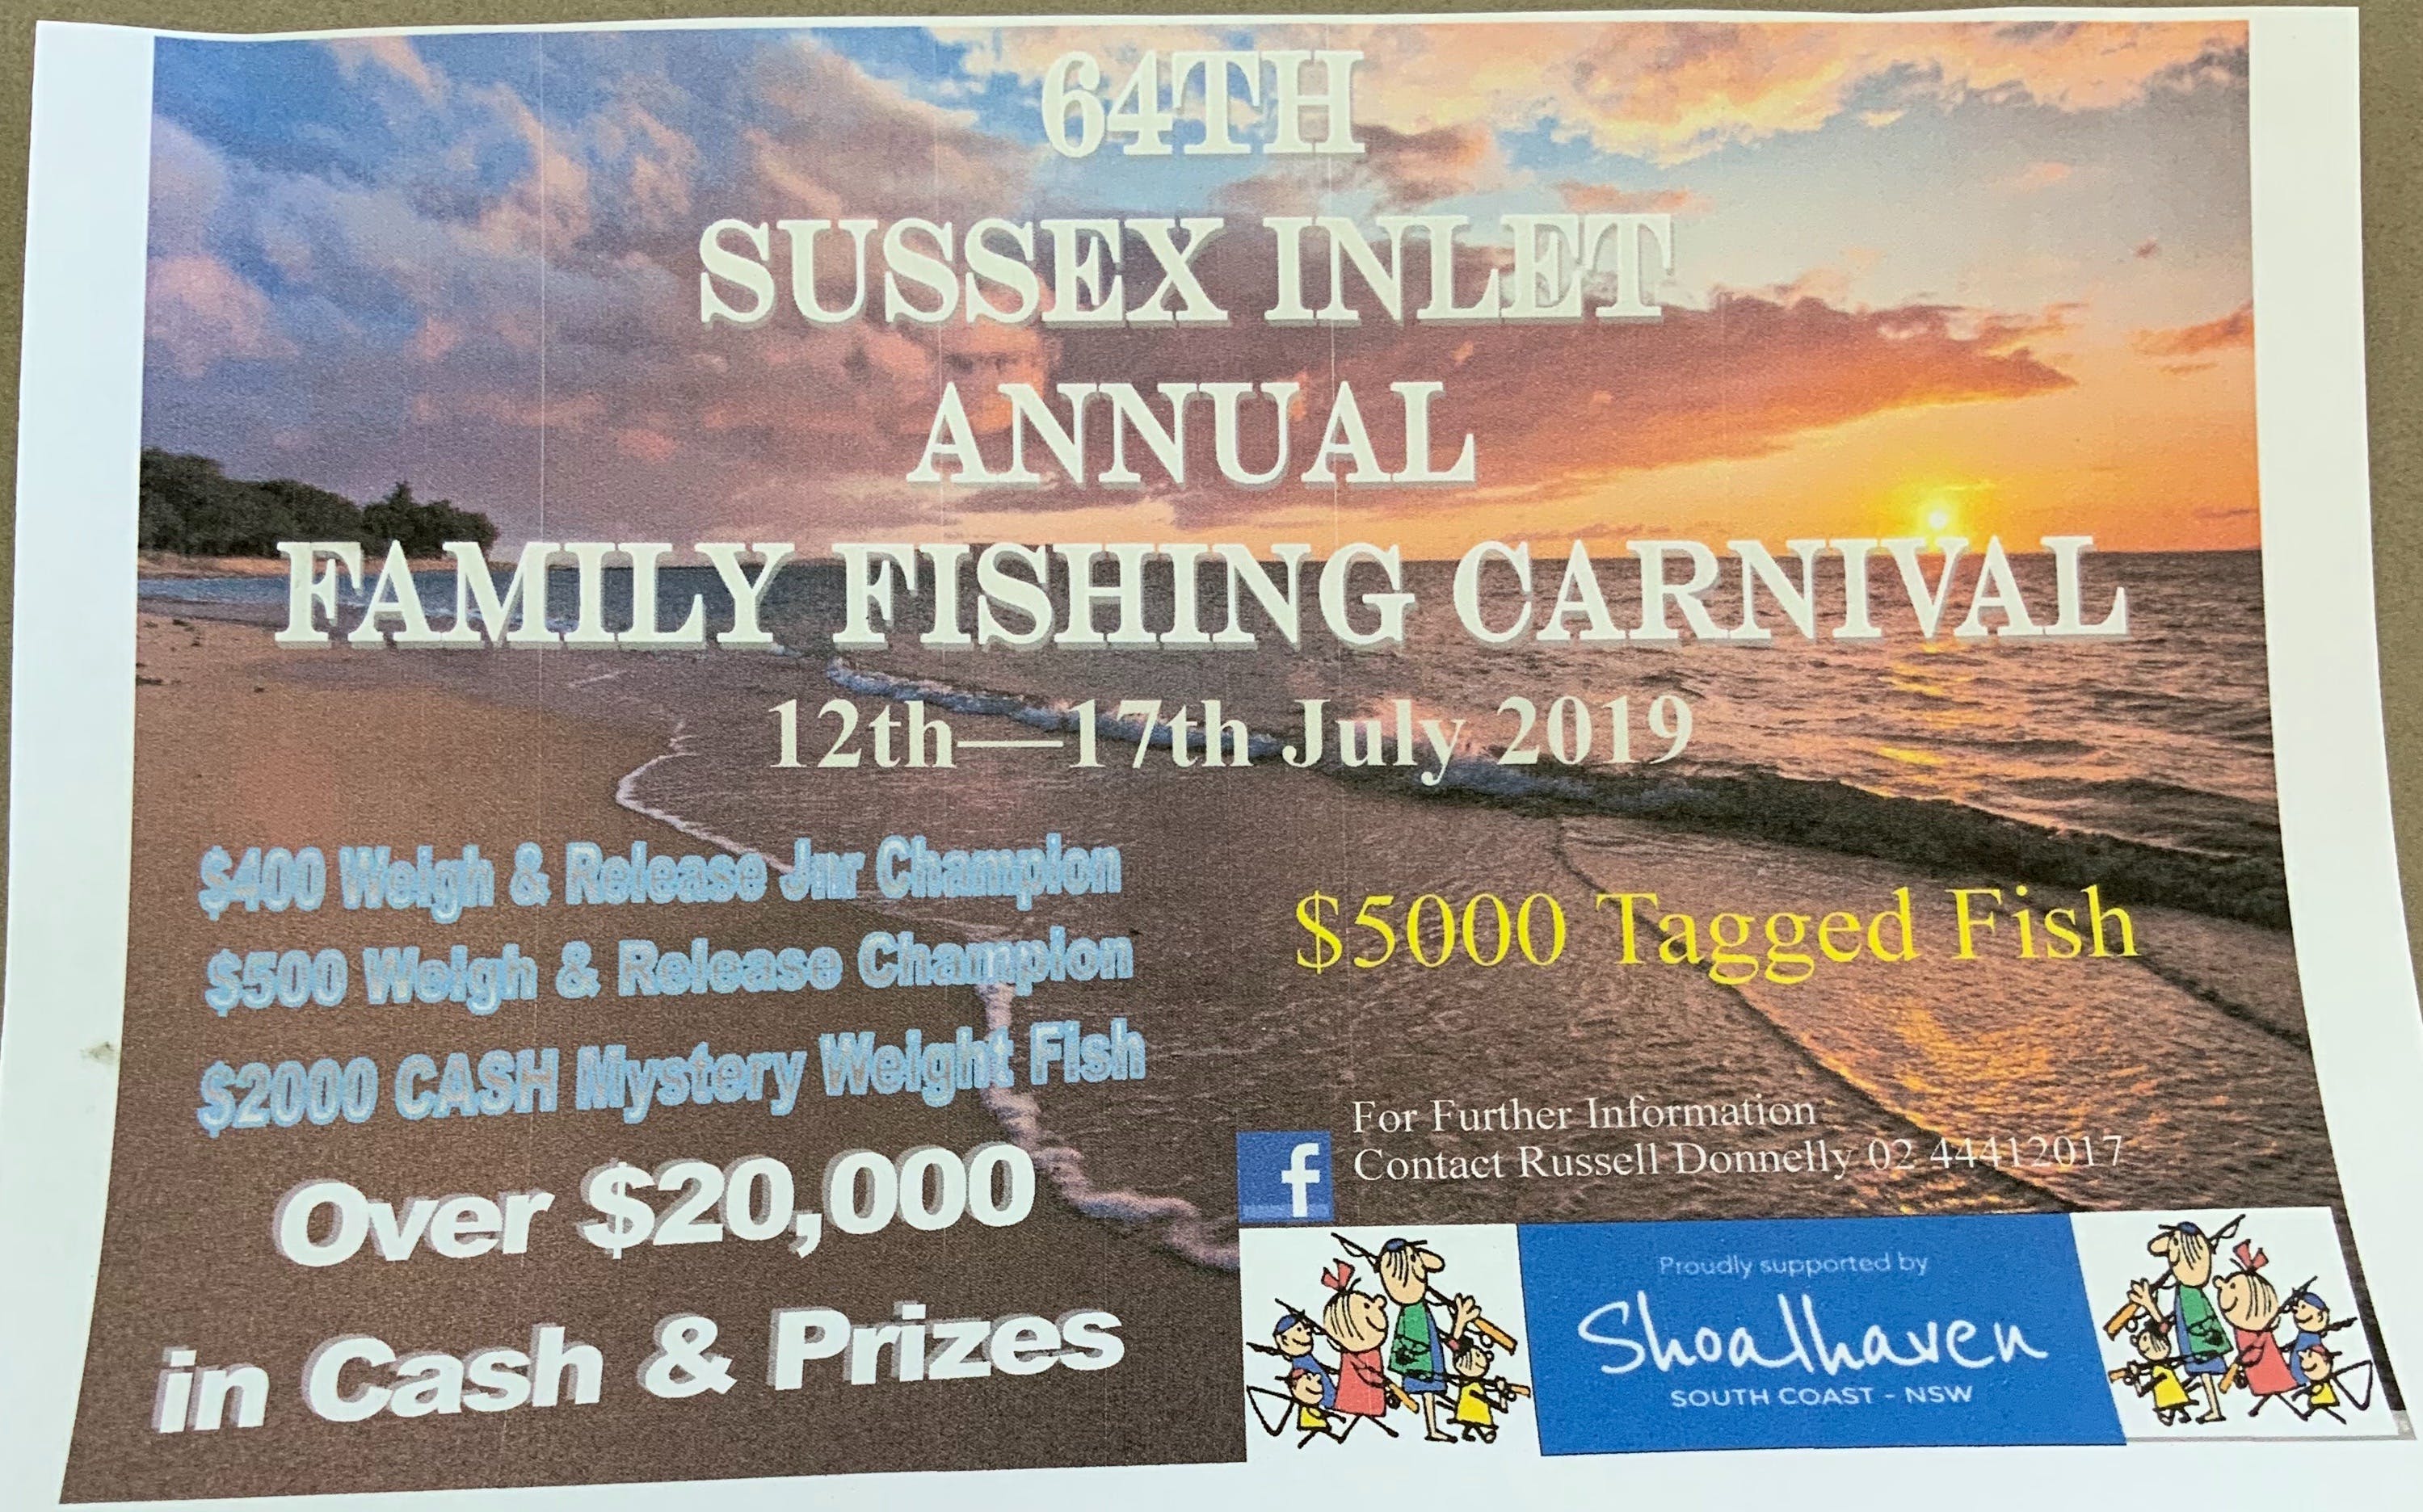 The Sussex Inlet Annual Family Fishing Carnival - Kingaroy Accommodation